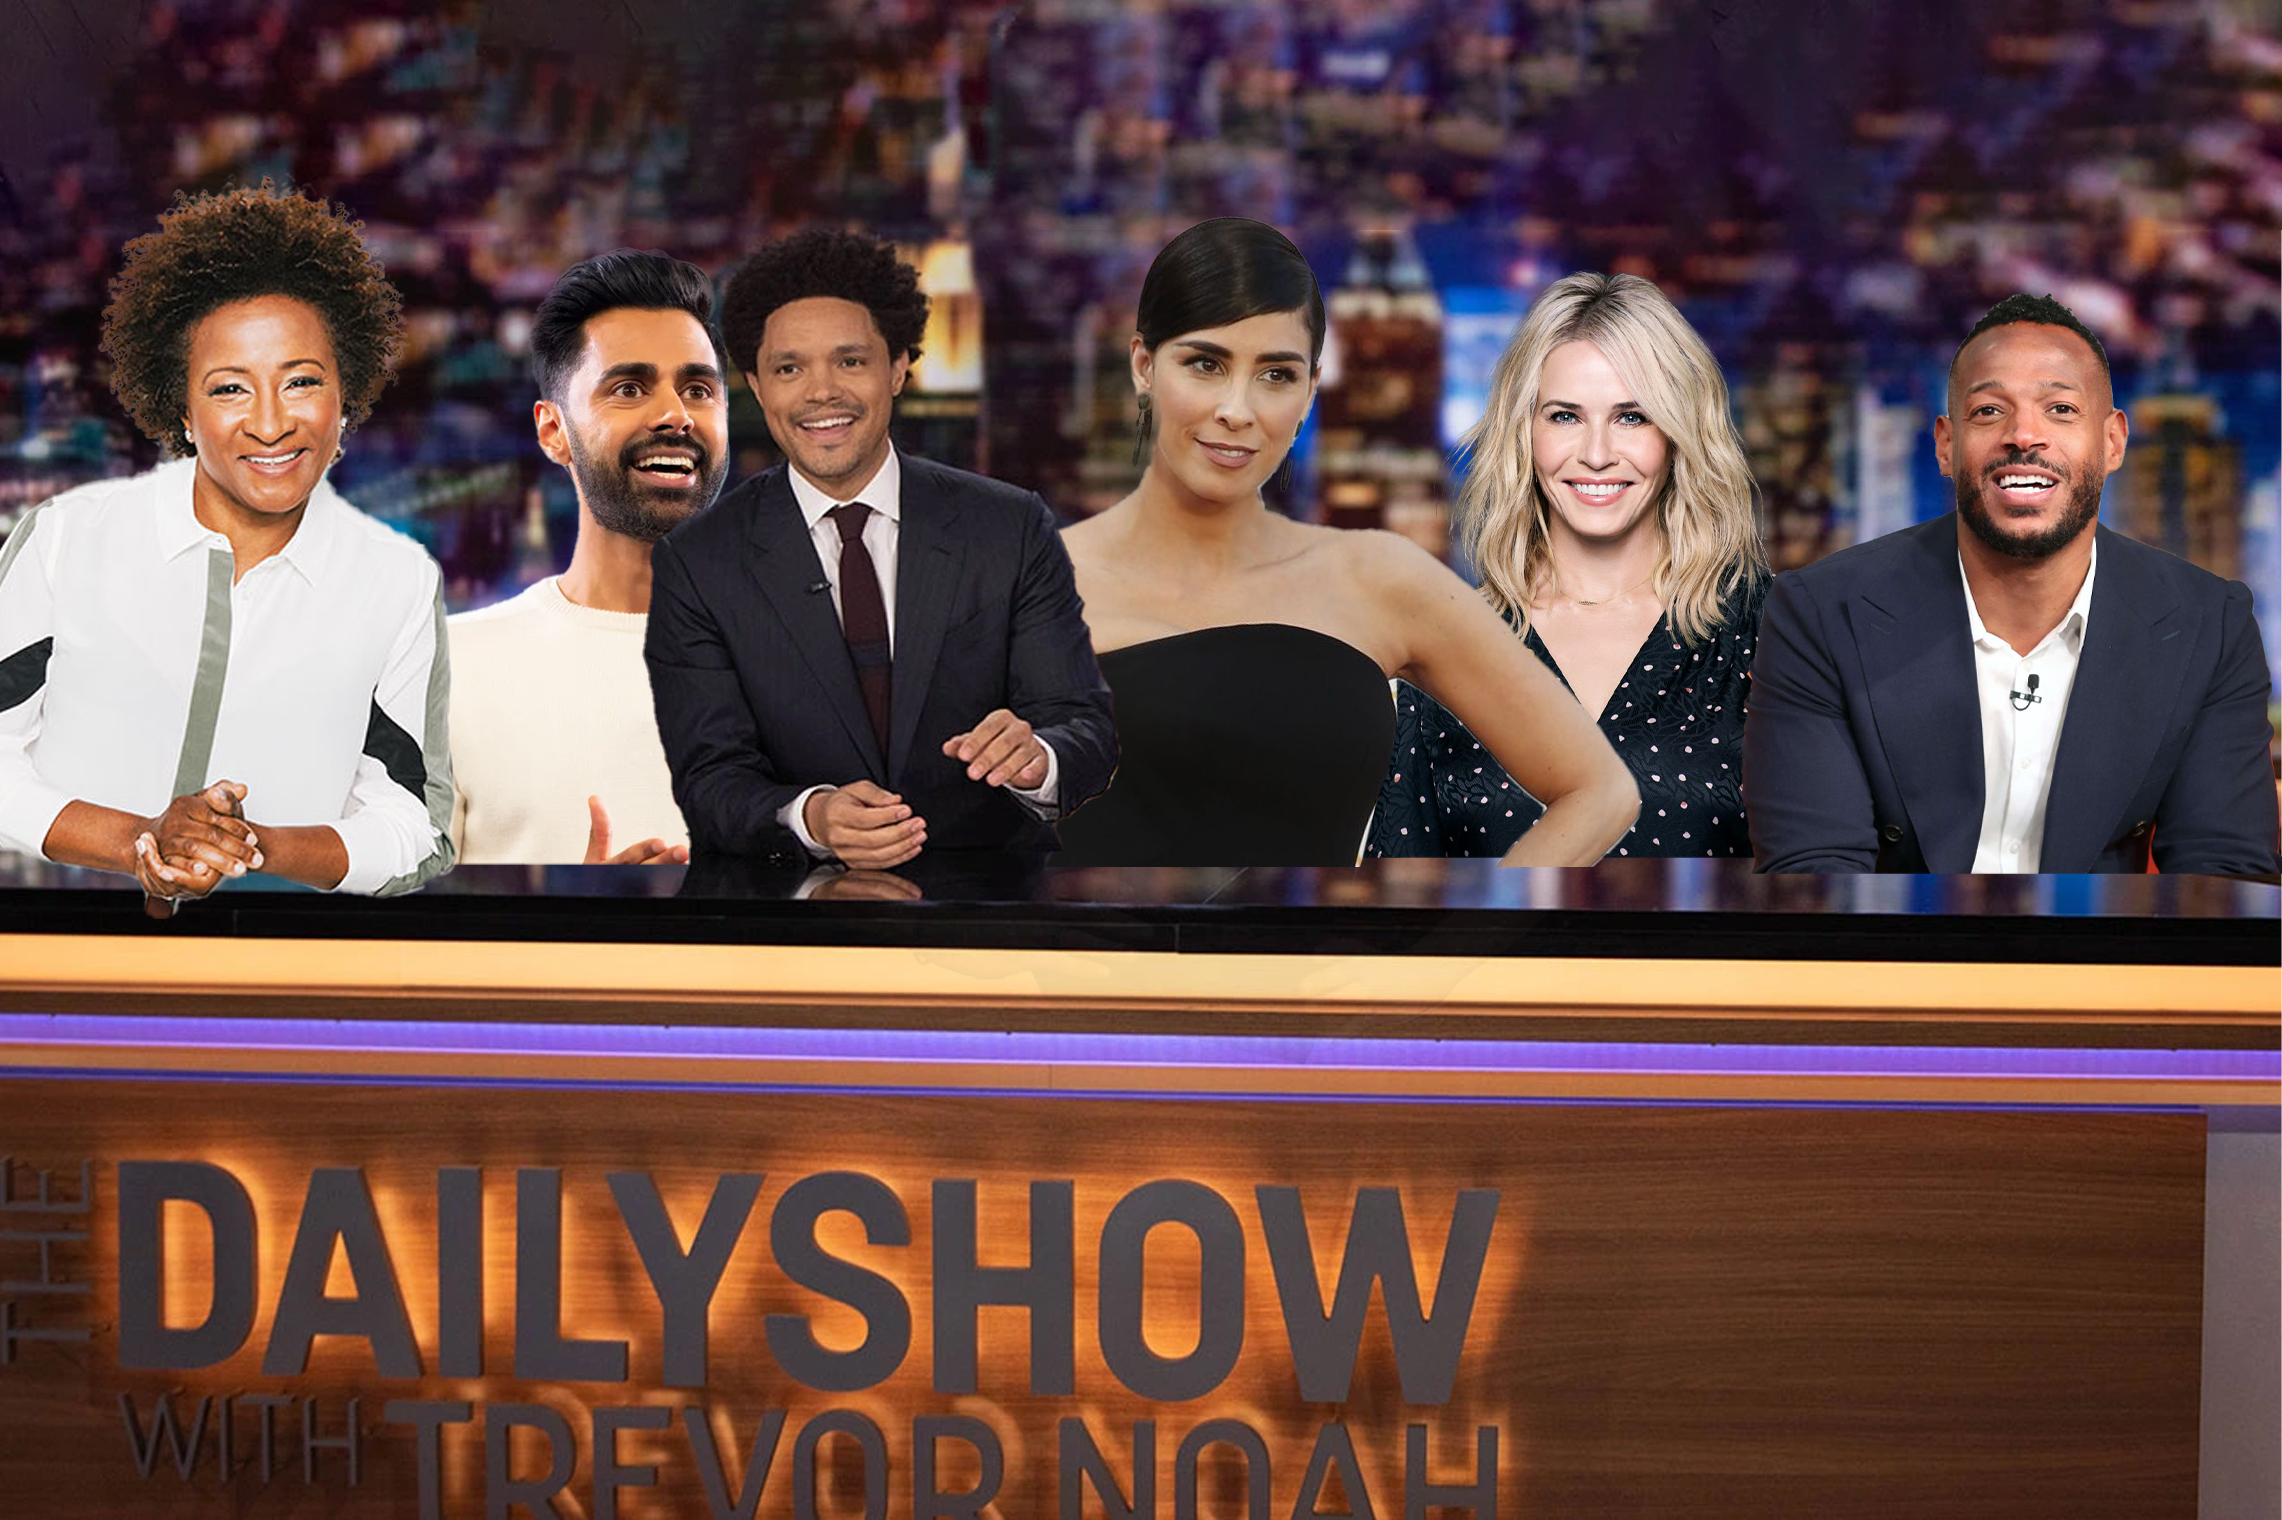 Daily Show Announces Lineup of Guest Hosts for 2023 RELEVANT